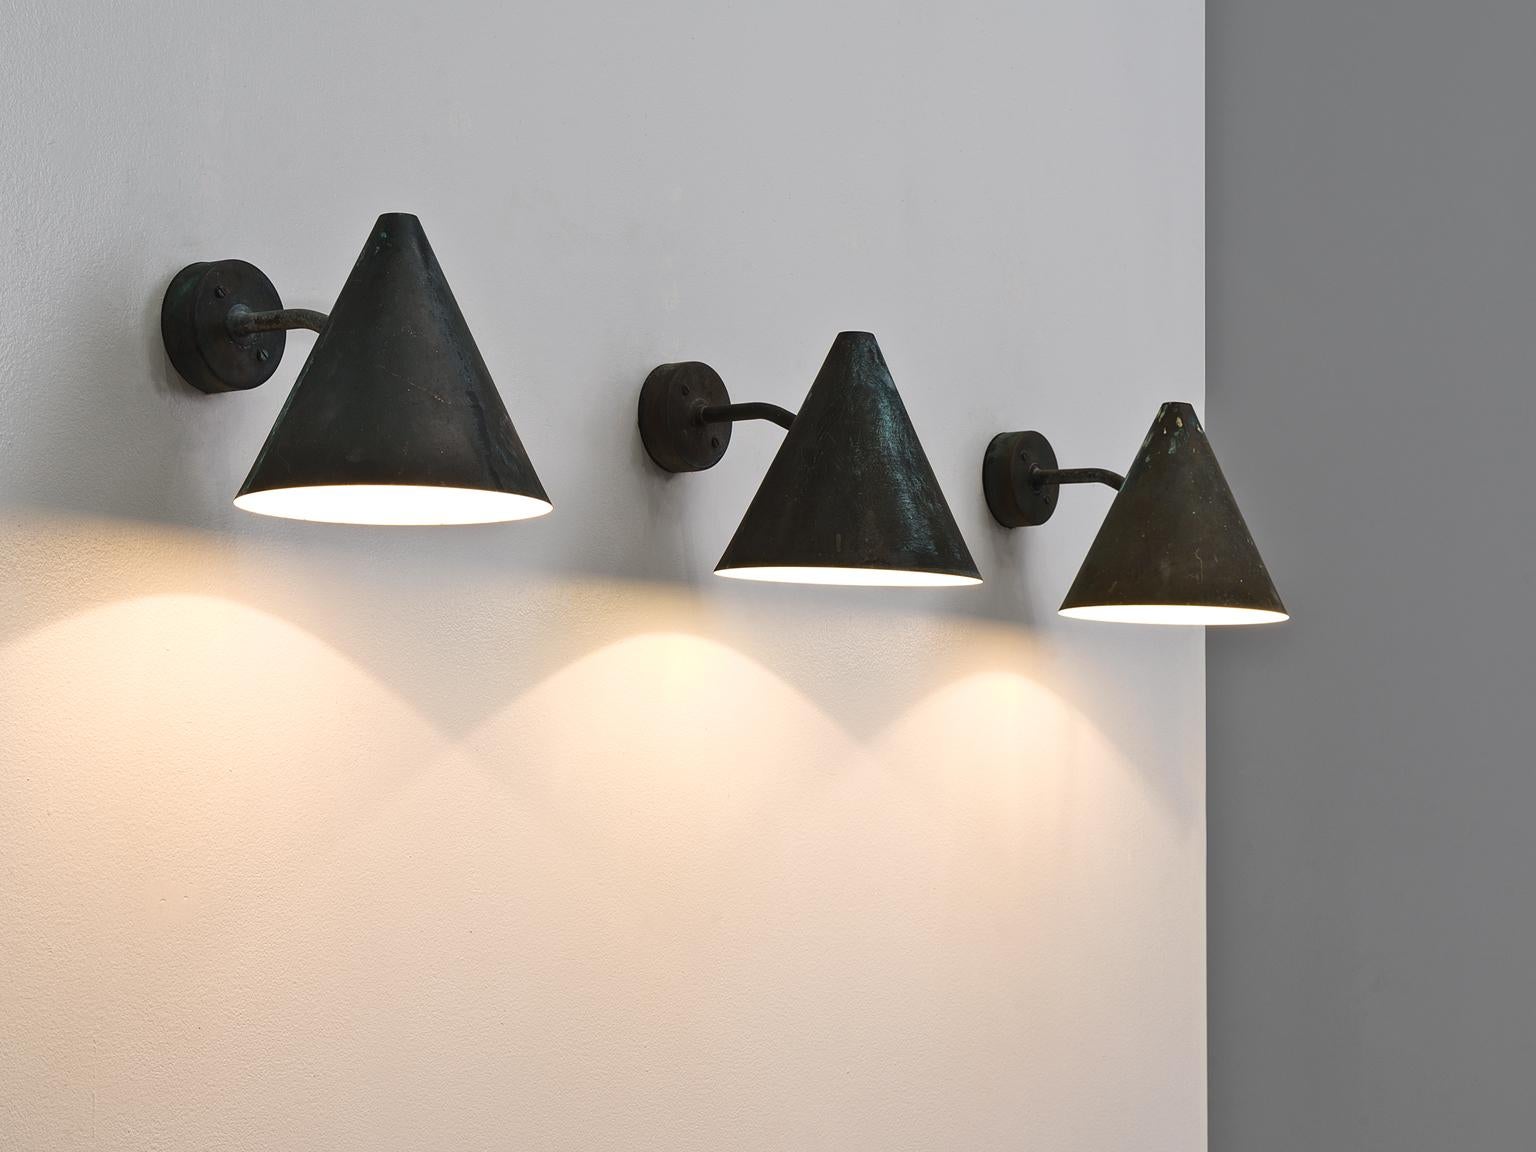 Hans-Agne Jakobsson for AB Markaryd, large set of wall lights, in copper by Sweden, 1950s. 

Large set cone-shaped wall lights designed by Hans-Agne Jakobsson for AB Markaryd, in beautifully patinated copper. The light this model shines creates a